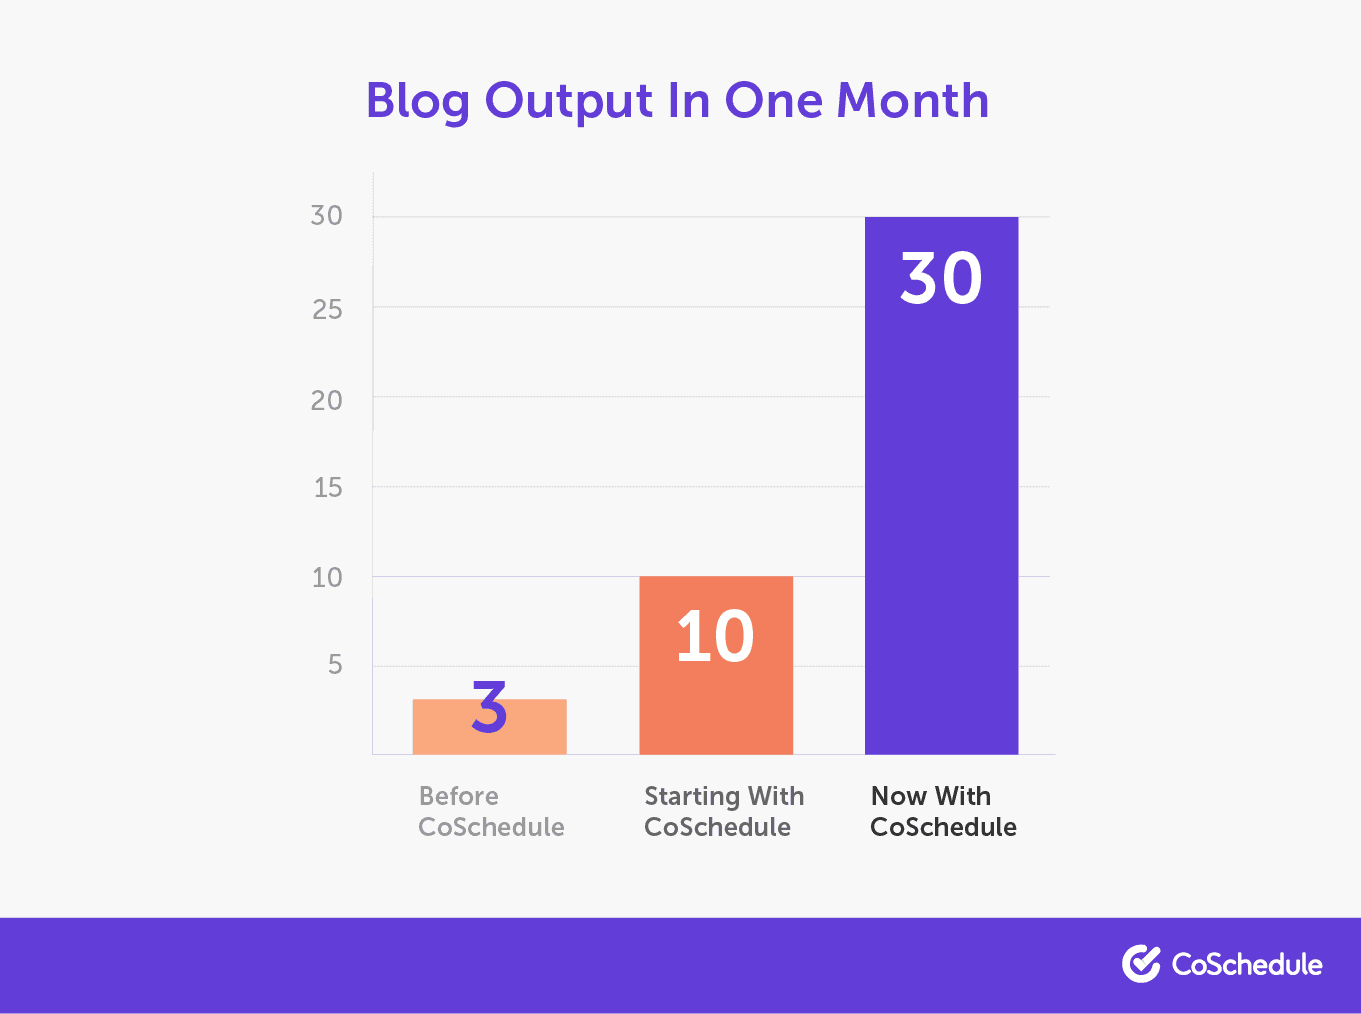 One month blog output